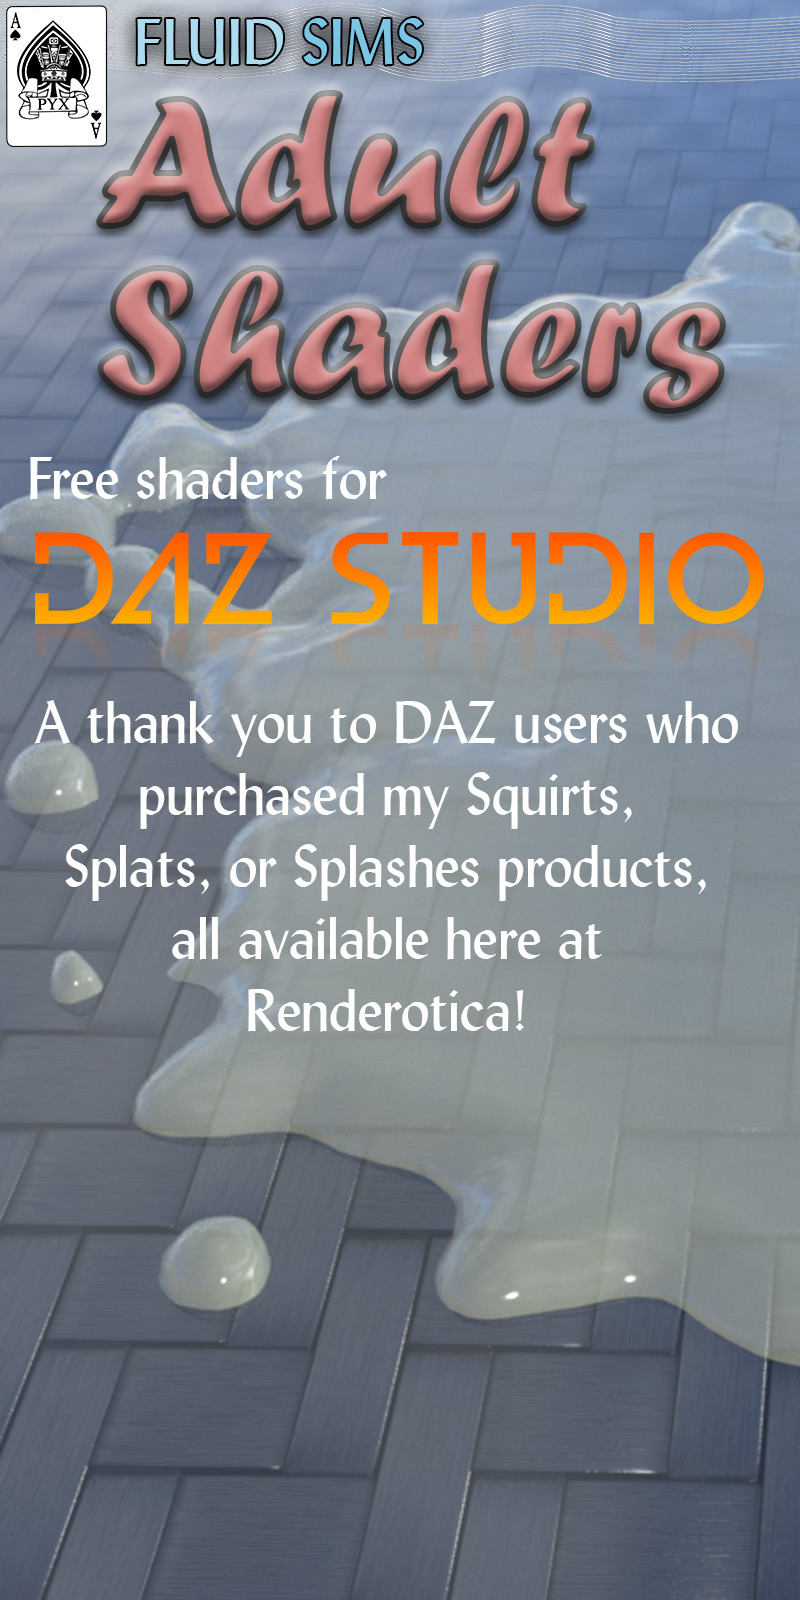 A thank you to DAZ users who purchased Ace Pyx’s Squirts, Splats and Puddles, or